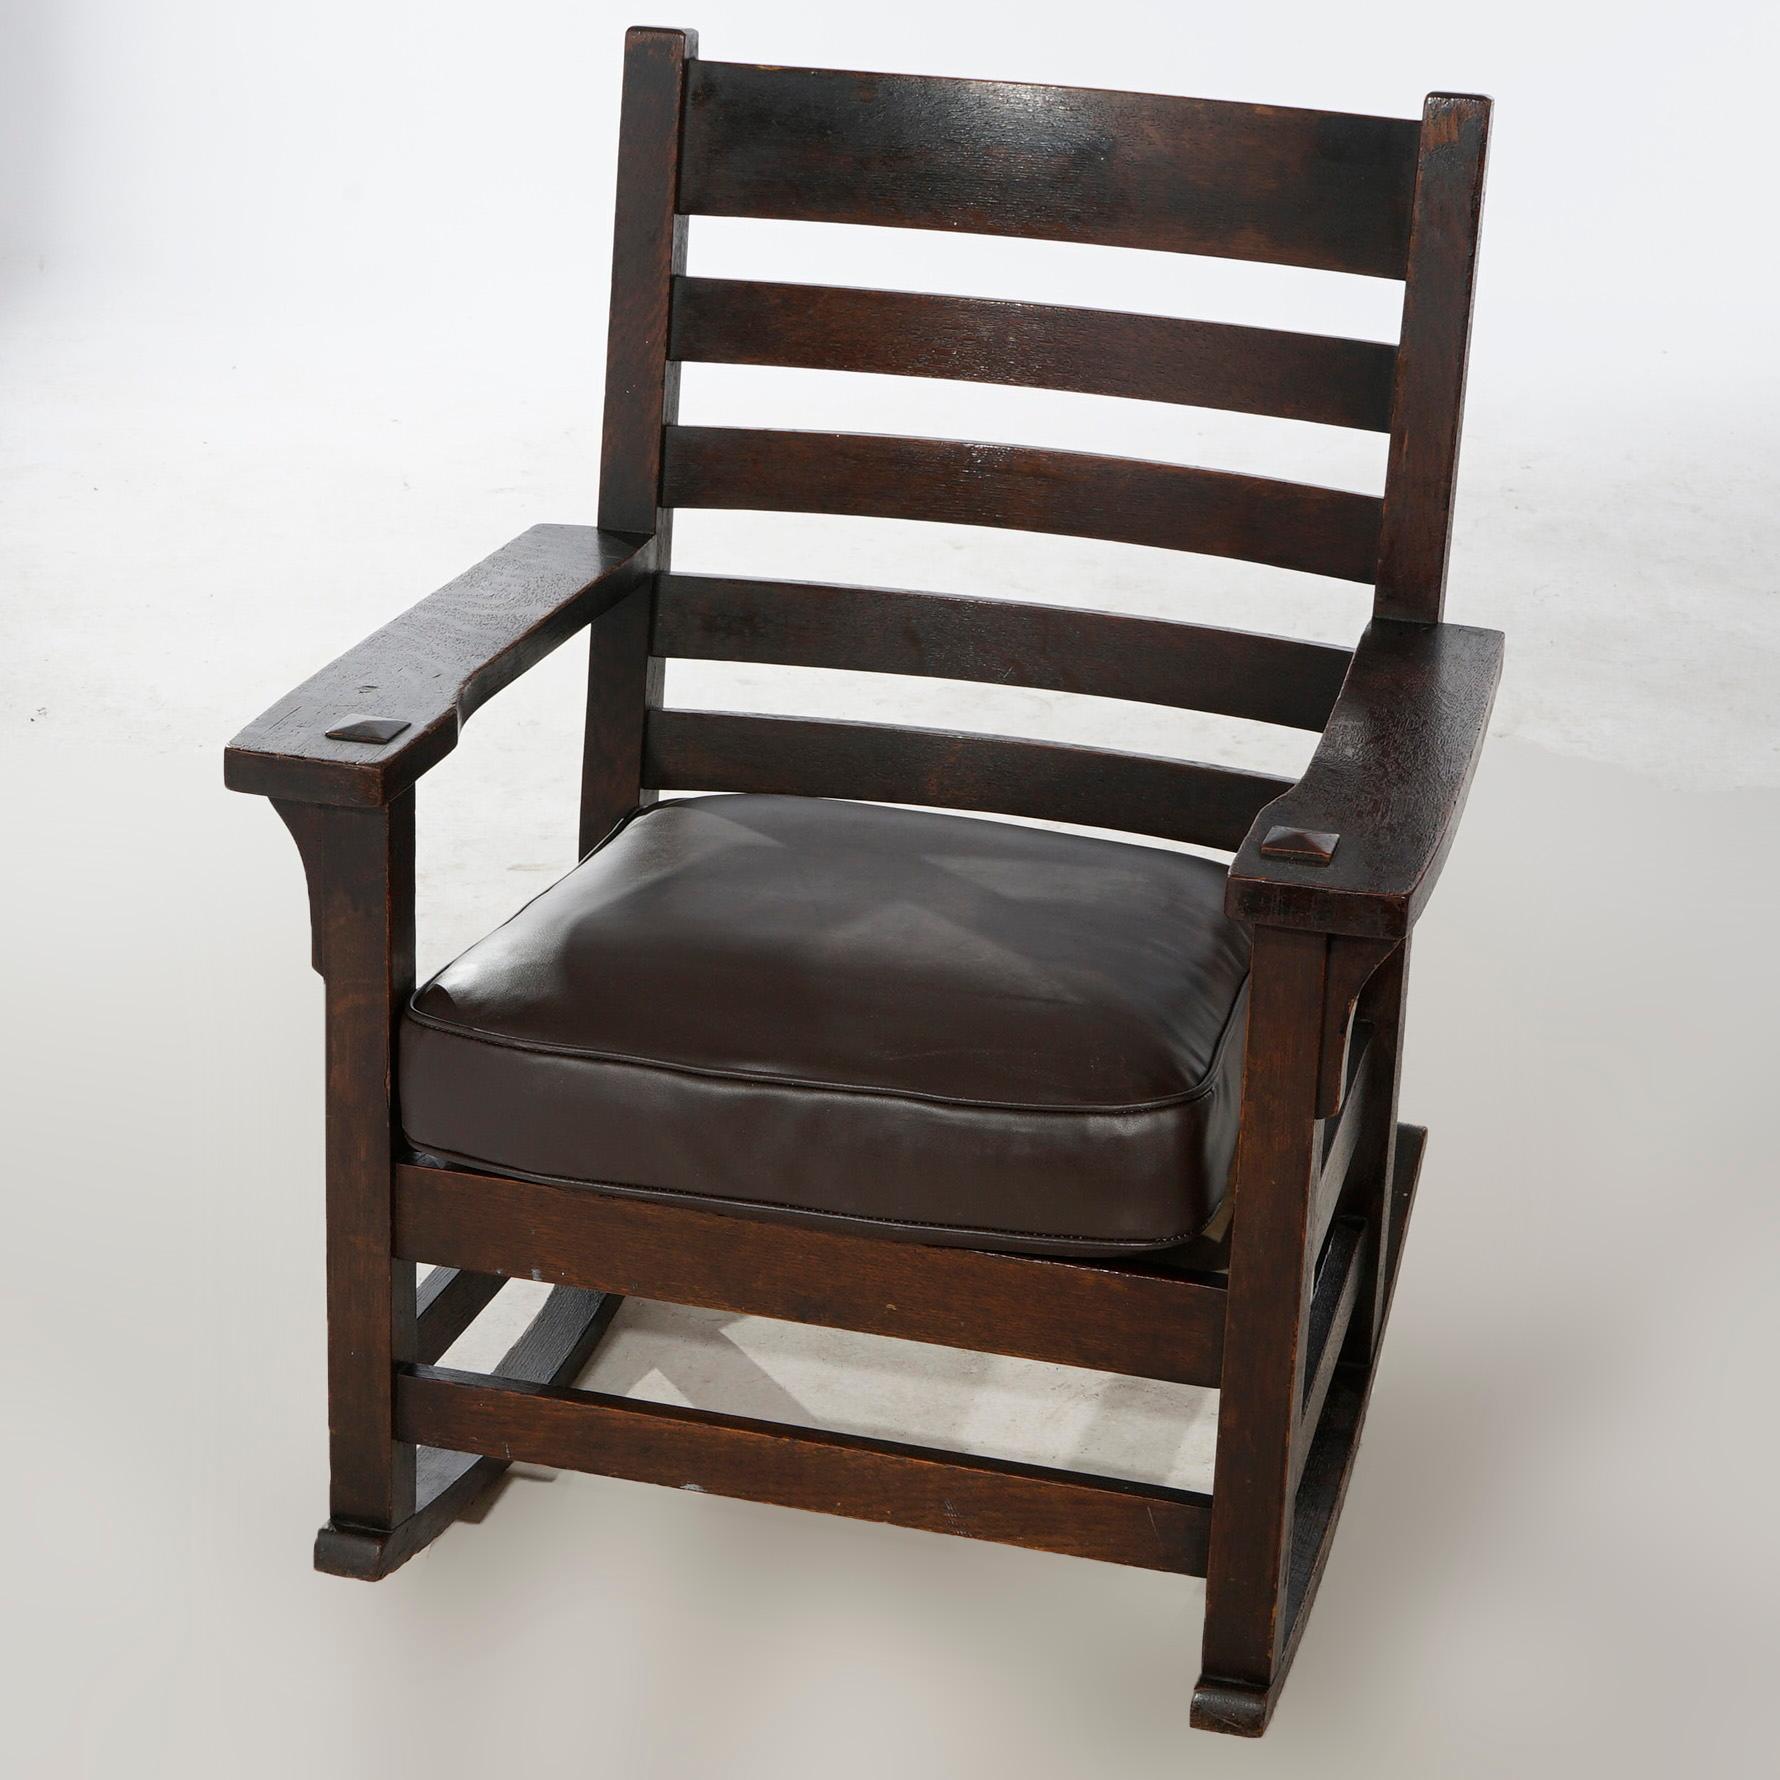 An antique Arts and Crafts Gustav Stickley rocking chair offers quarter sawn oak construction with ladder back and upholstered seat, c1910.

Measures- 35''H x 27.25''W x 28.25''D.